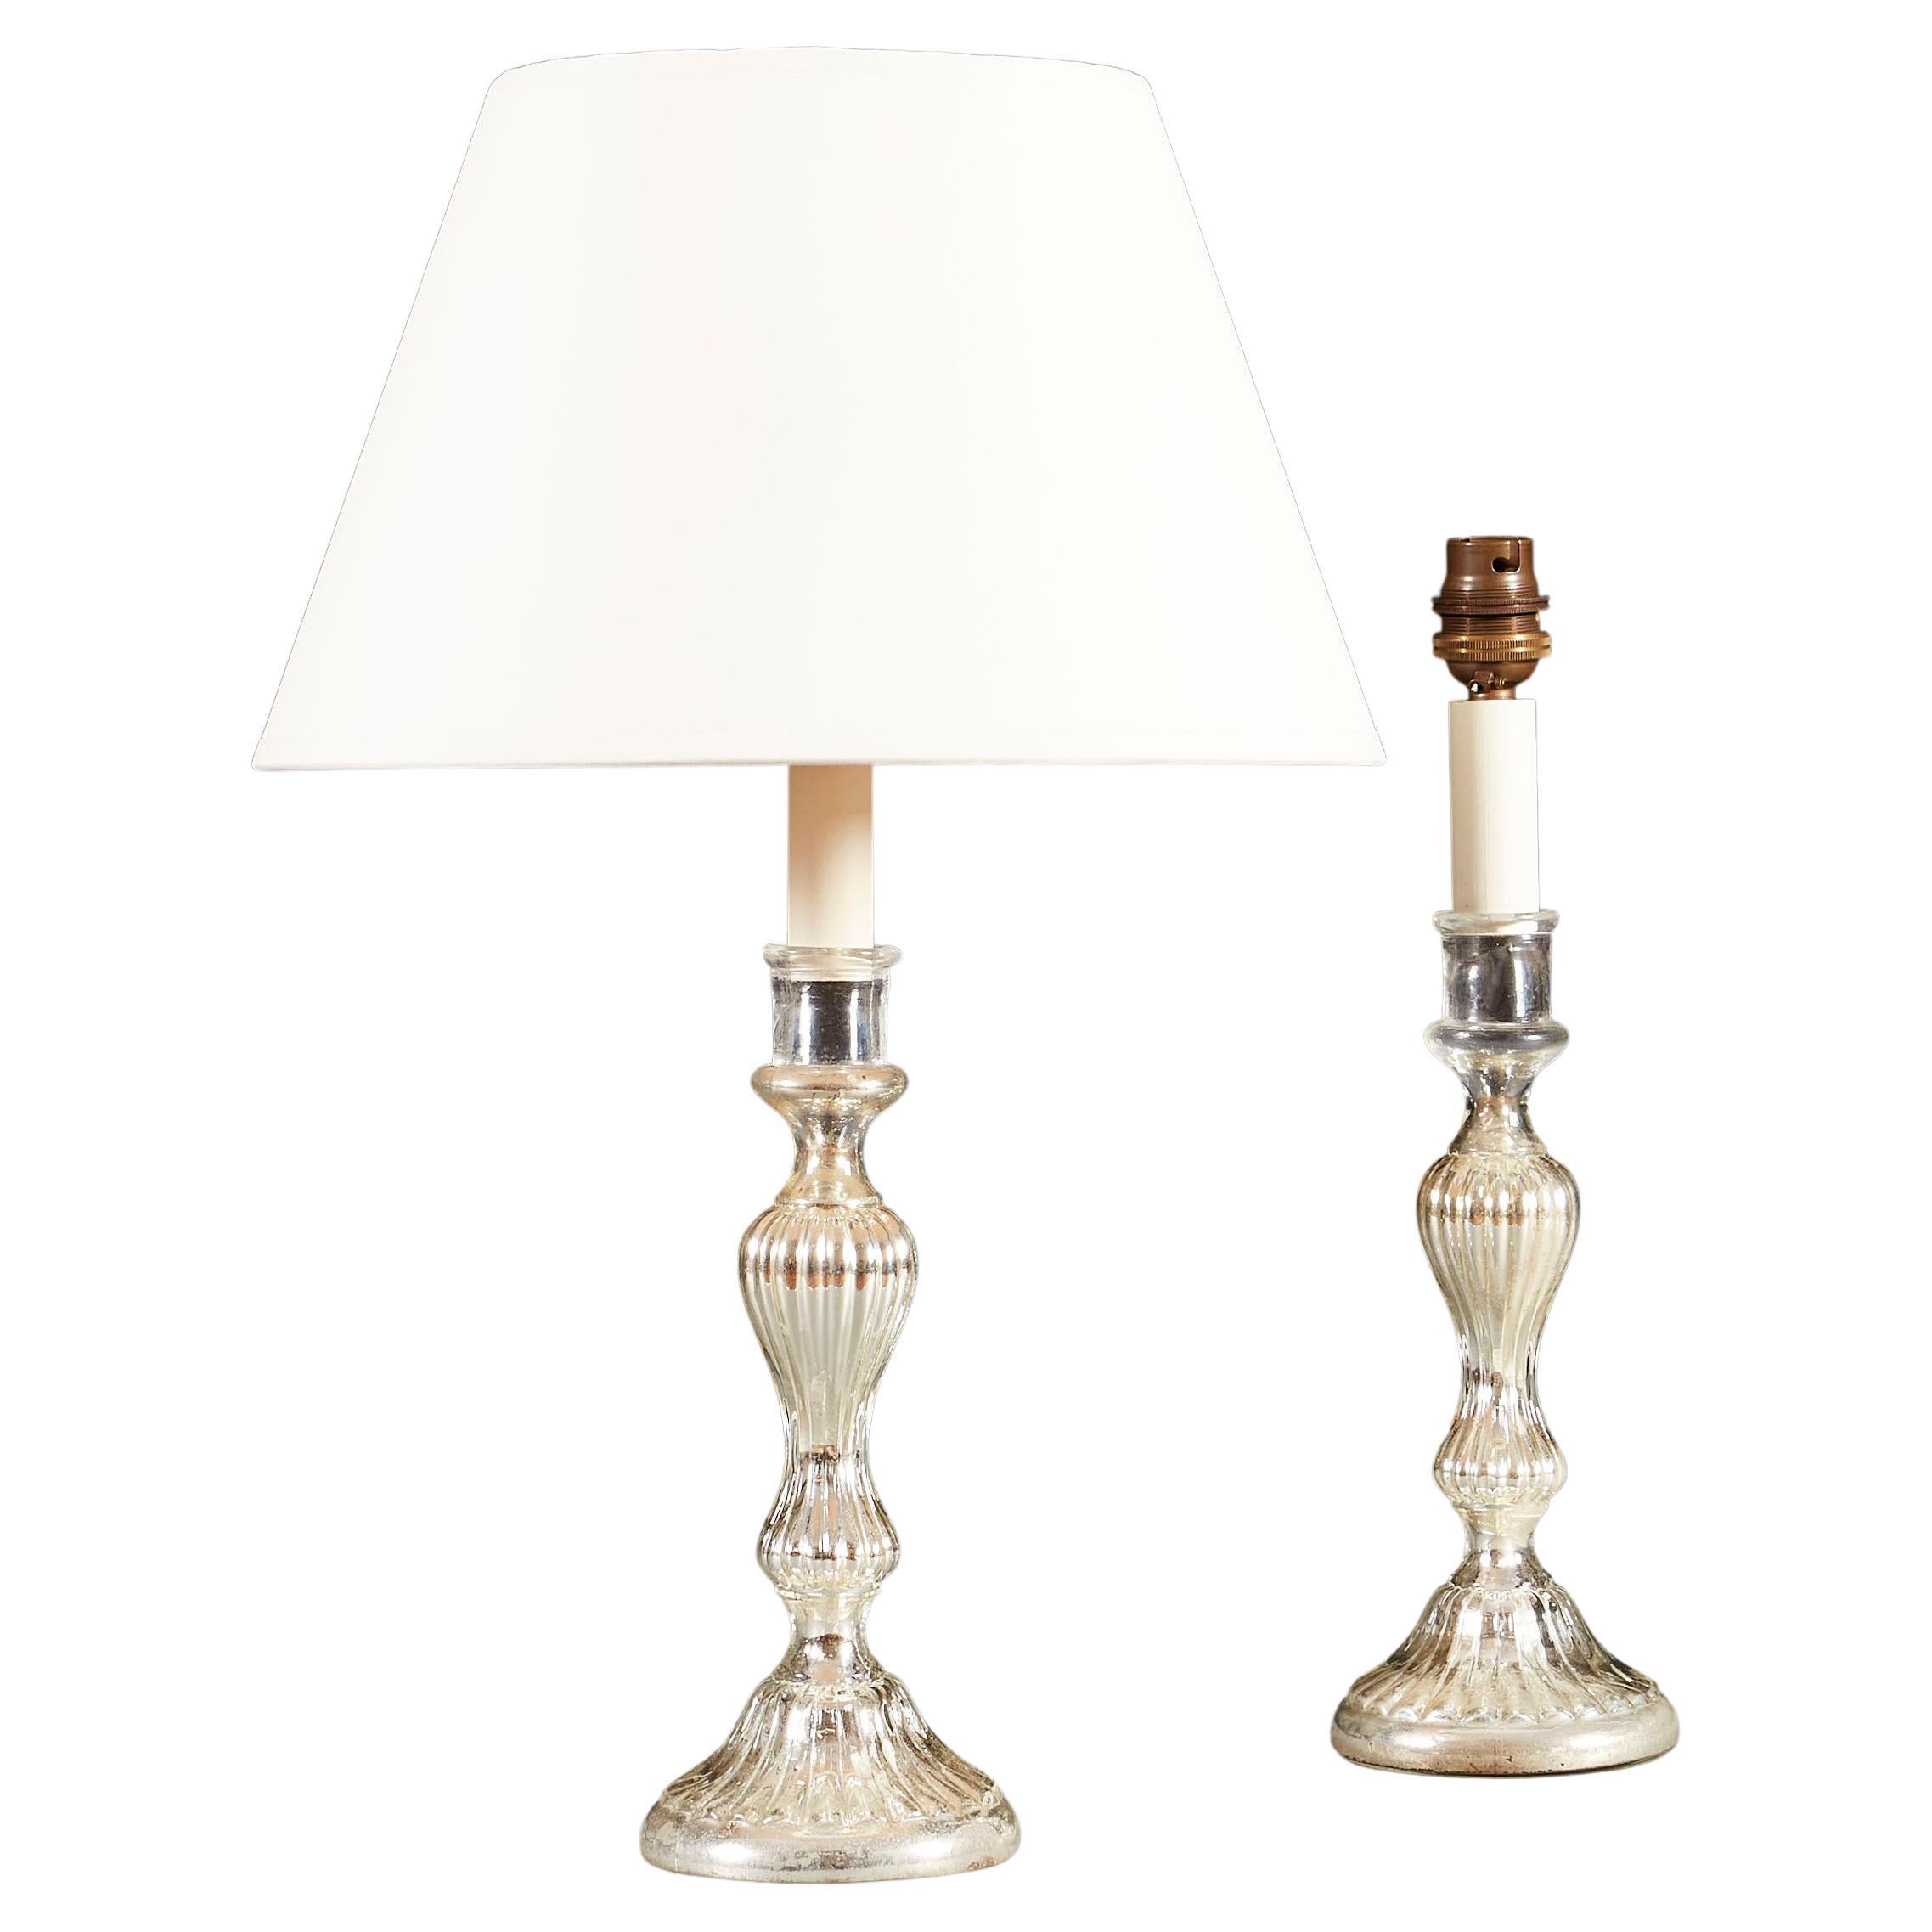 A Pair of Mercury Glass Candlestick Table Lamps